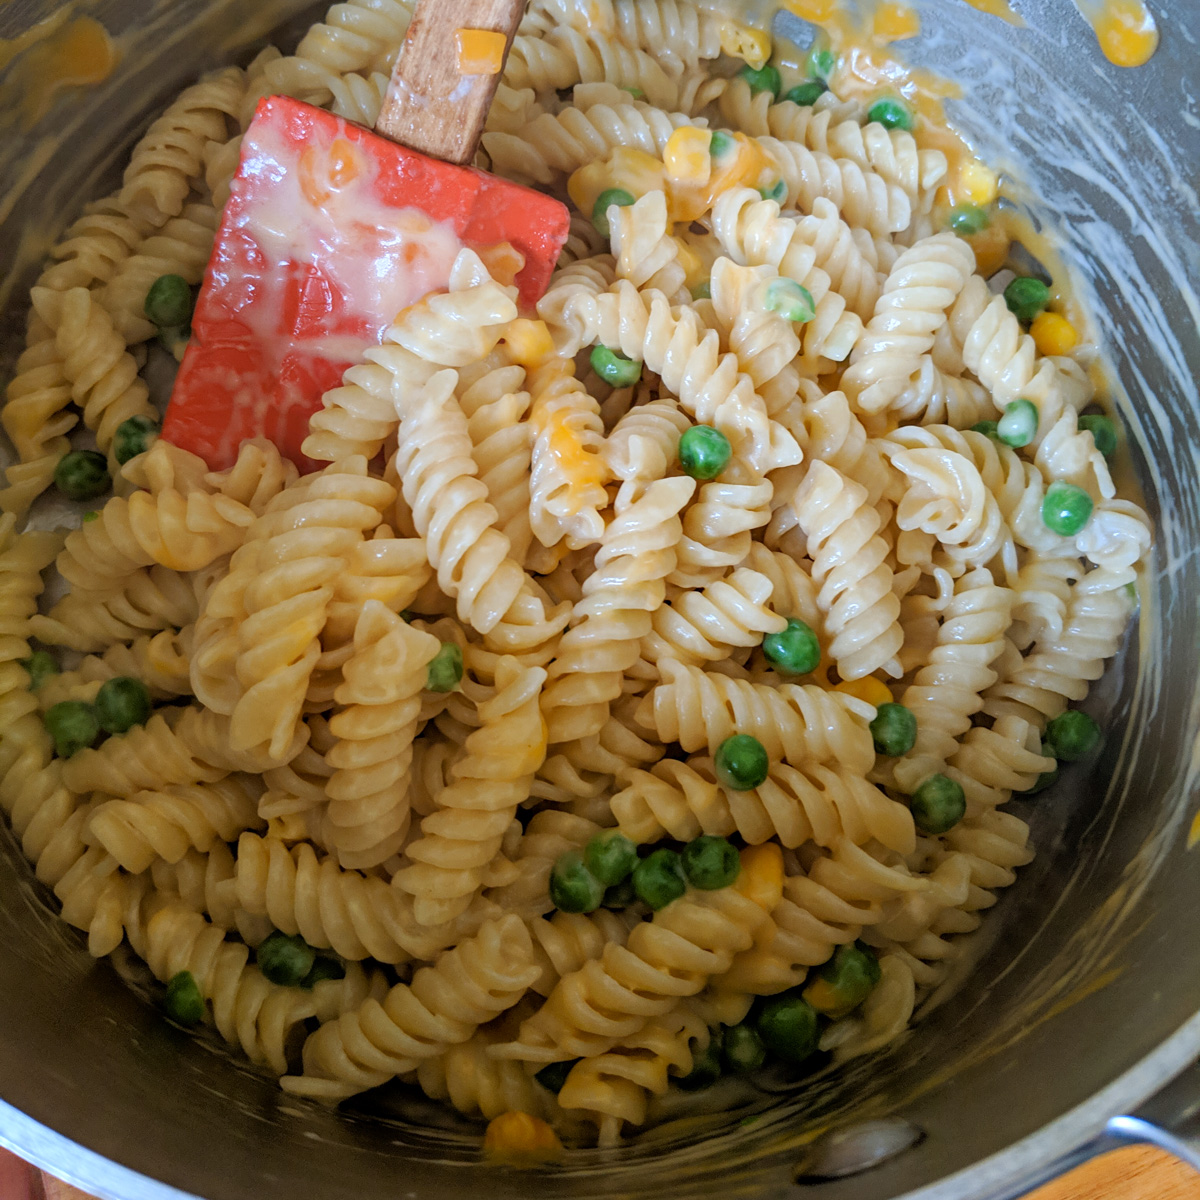 A variation of a pot of mac and cheese with rotini pasta, peas and corn.